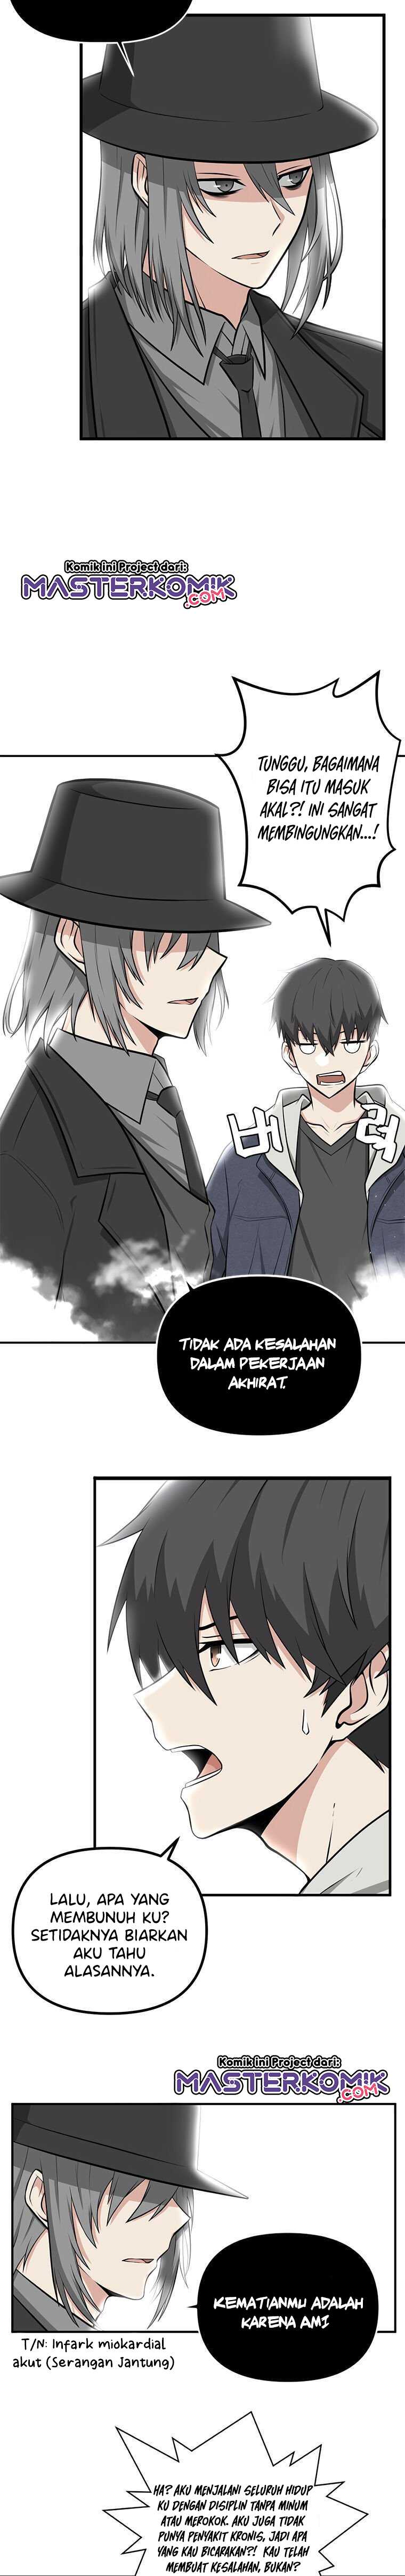 Where Are You Looking, Manager? Chapter 01